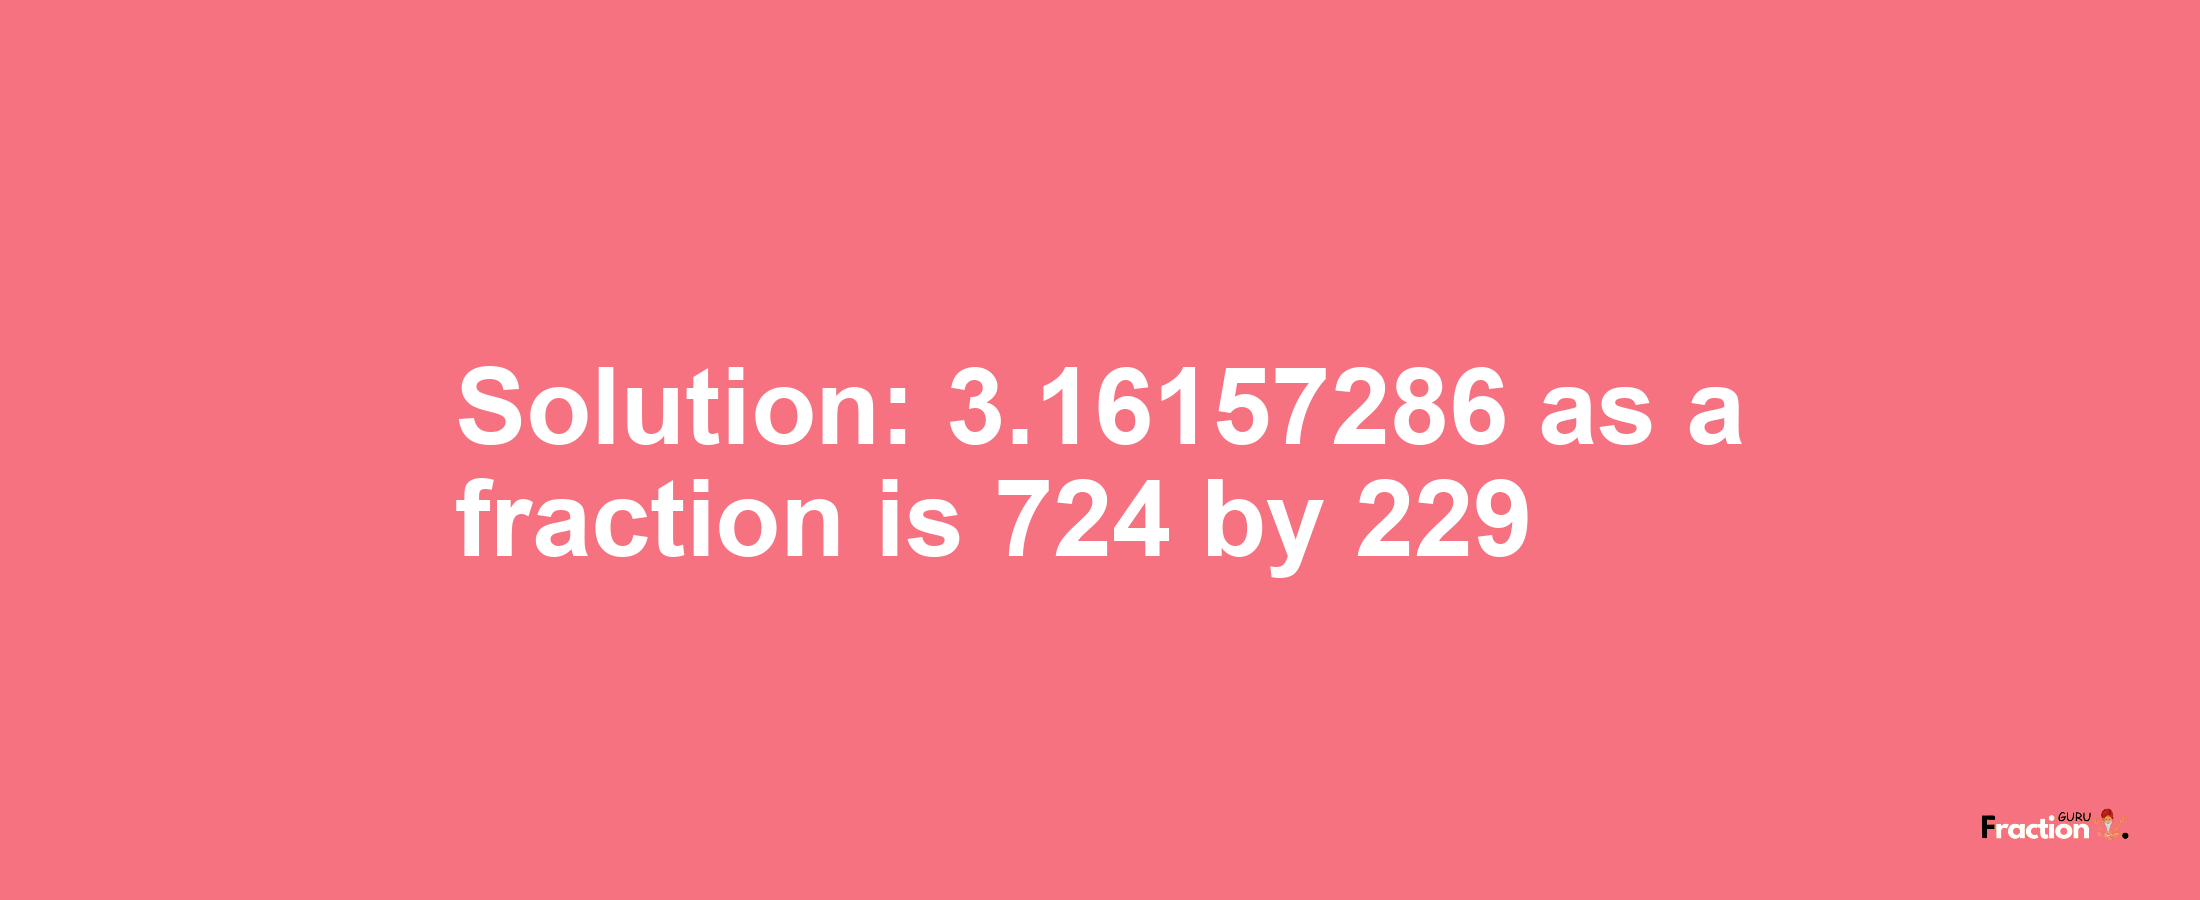 Solution:3.16157286 as a fraction is 724/229